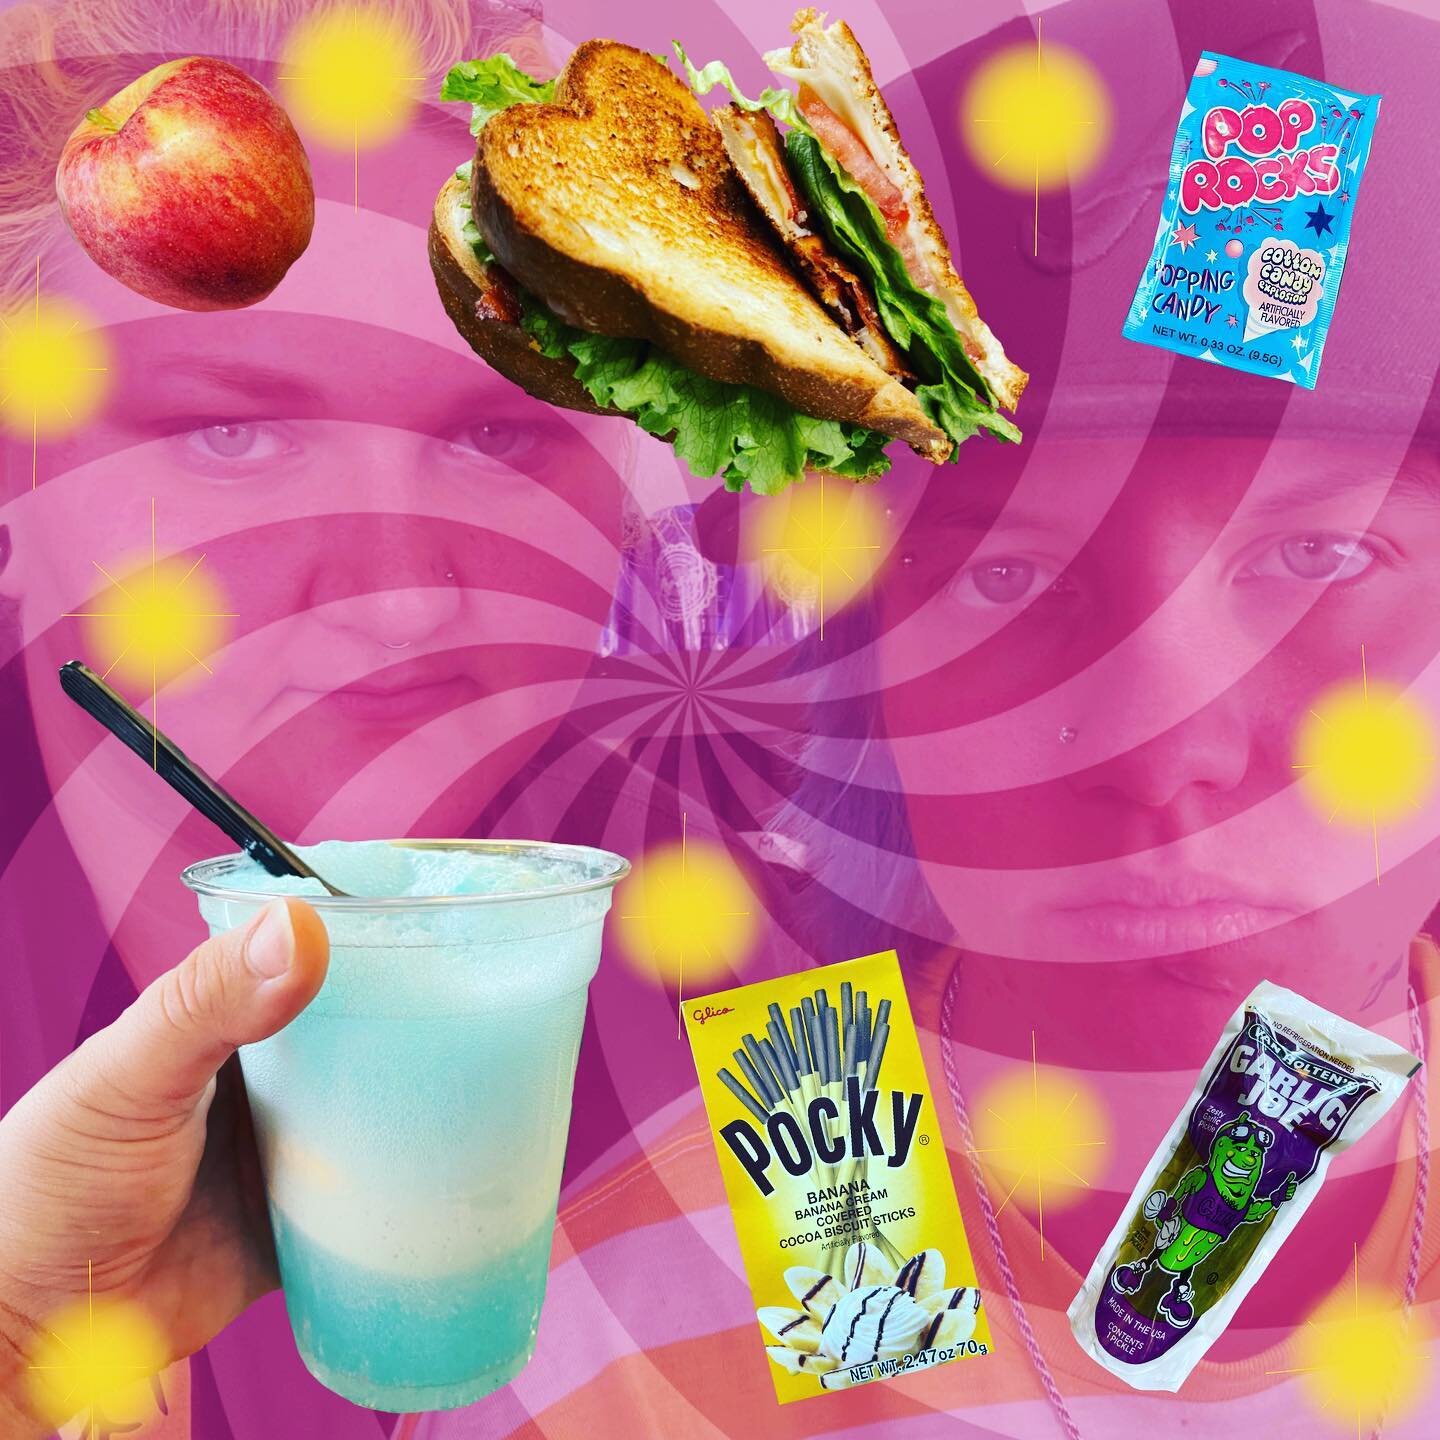 🔮🪄🌀YOU WANT A SANDWICH 🌀YOU WANT TASTY SNACKS 🌀 A BLUE RAZZBERRY FLOAT SOUNDS REALLY GOOD RIGHT NOW 🌀🪄🔮